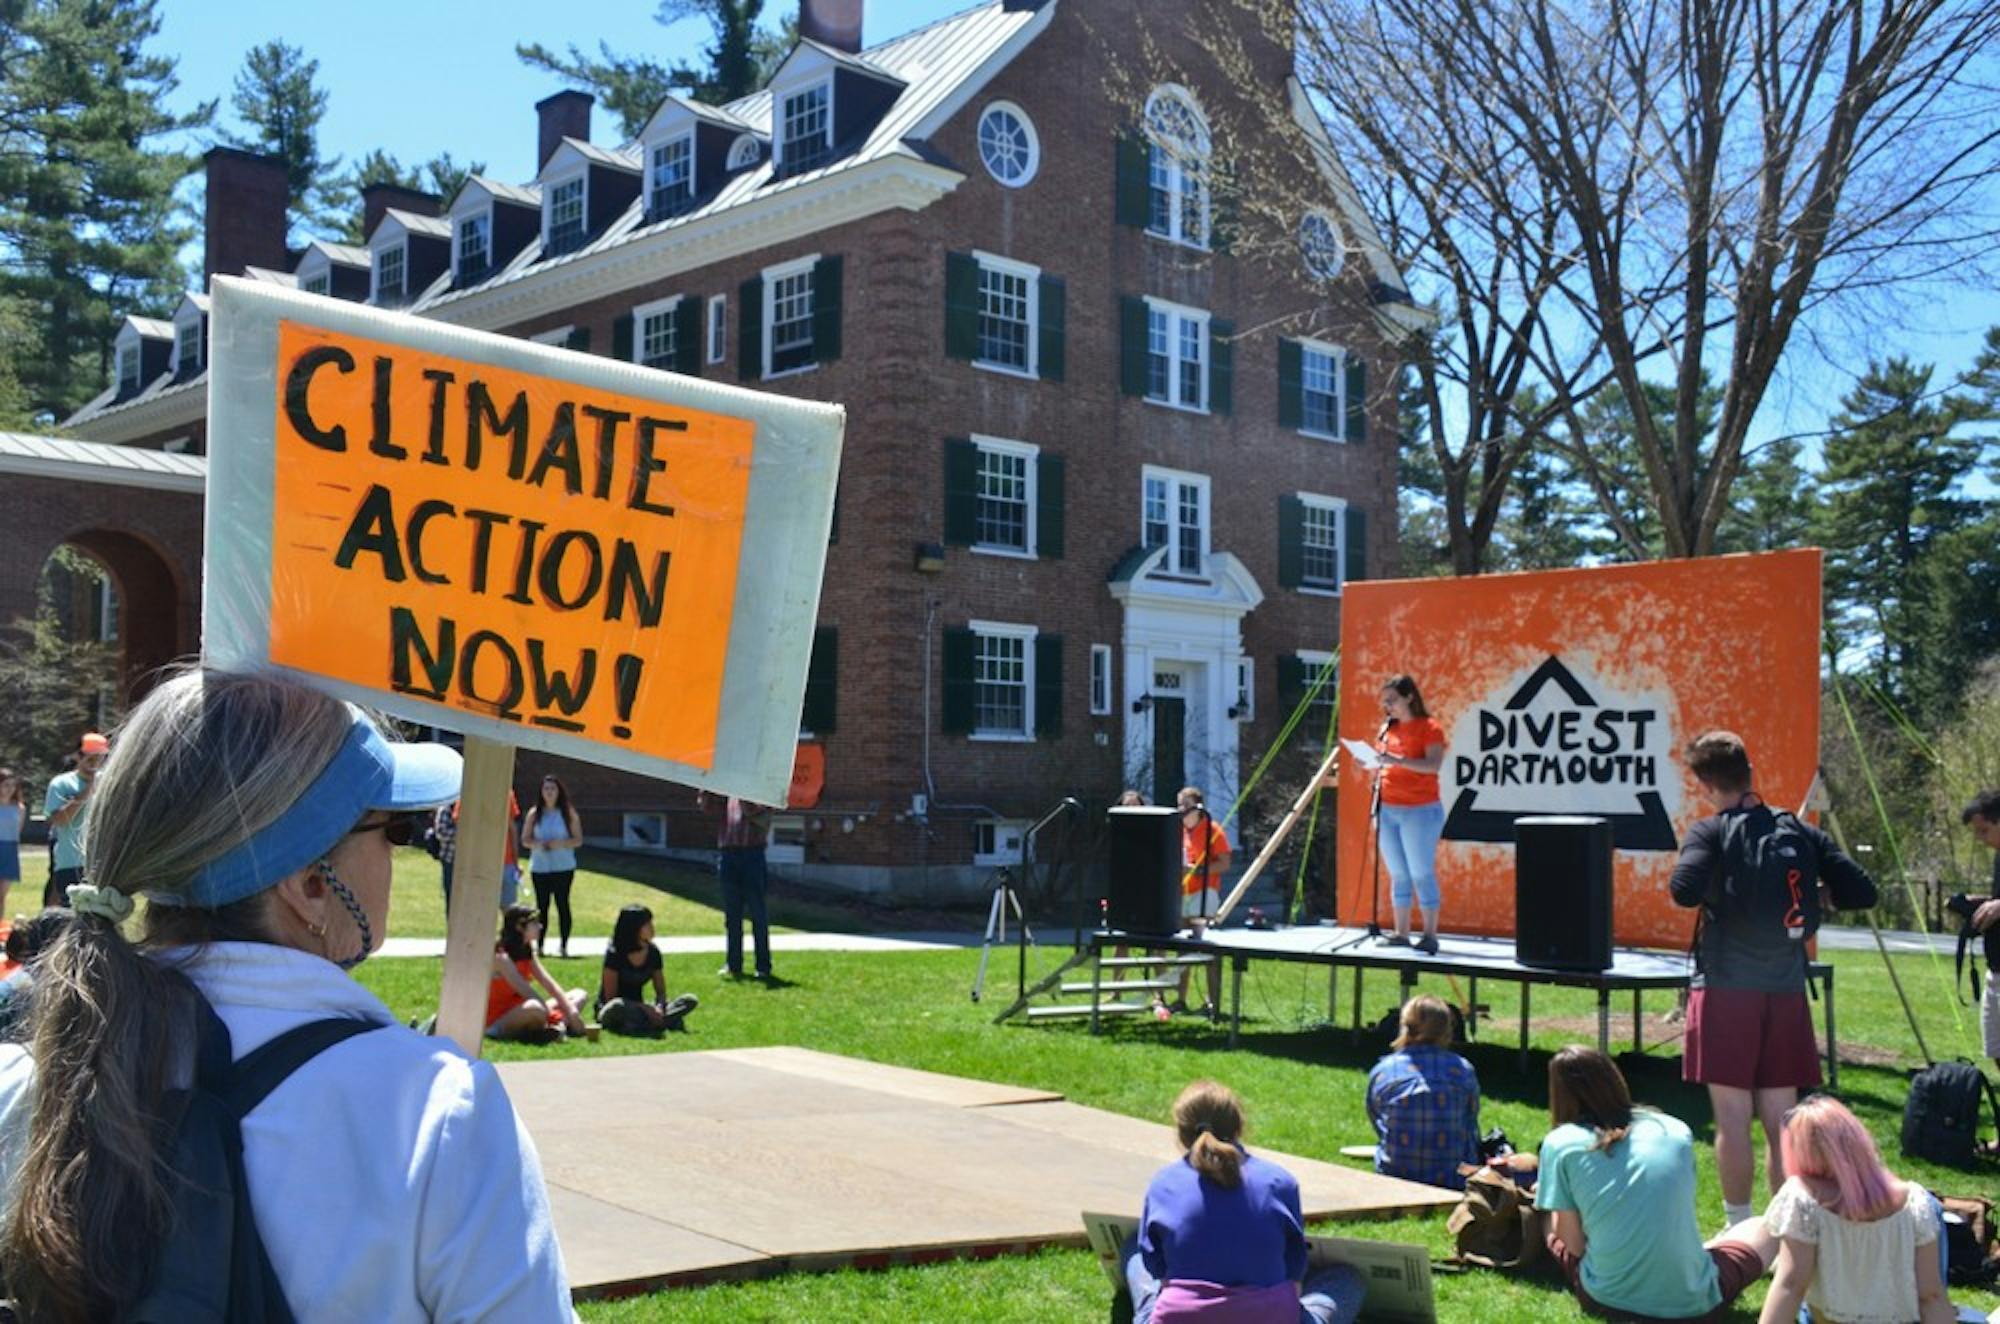 Divest Dartmouth hosted the largest climate rally in New Hampshire.